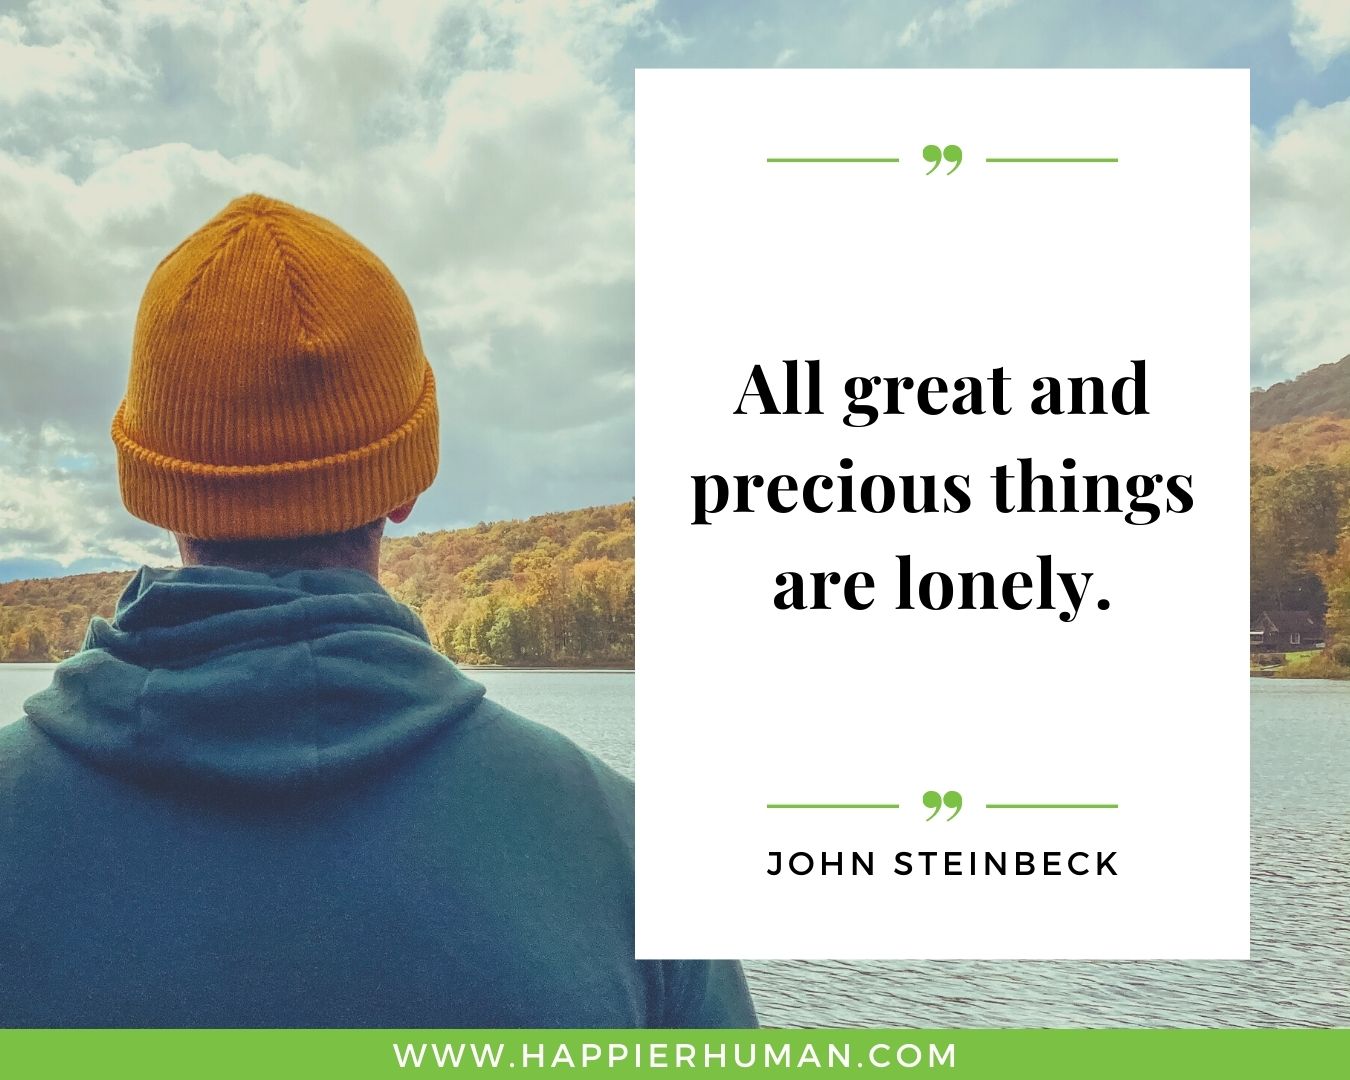 Loneliness Quotes - "All great and precious things are lonely."– John Steinbeck